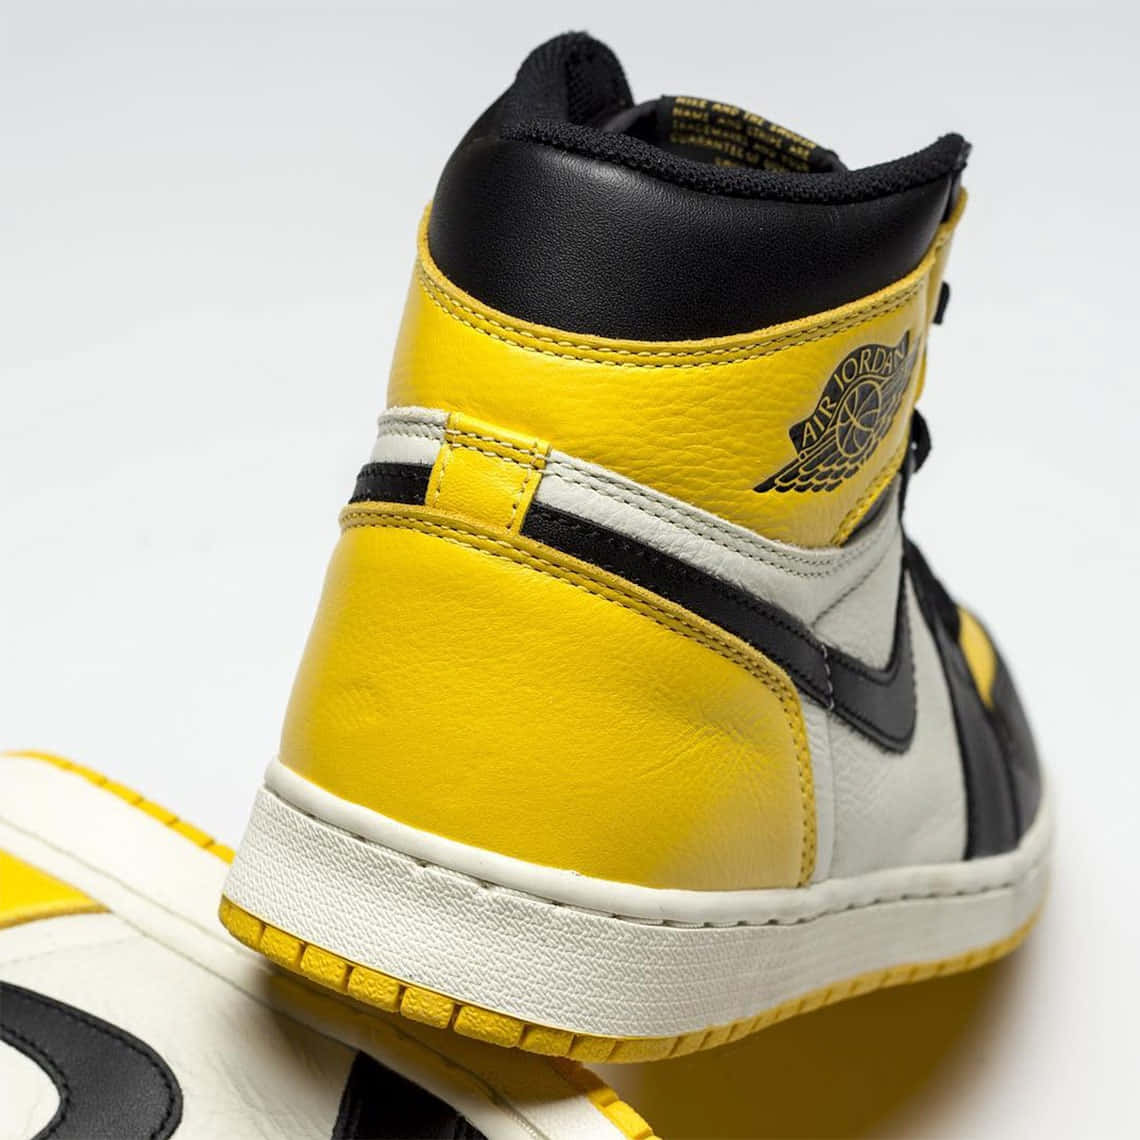 Jump into style with this signature Yellow Jordan footwear! Wallpaper